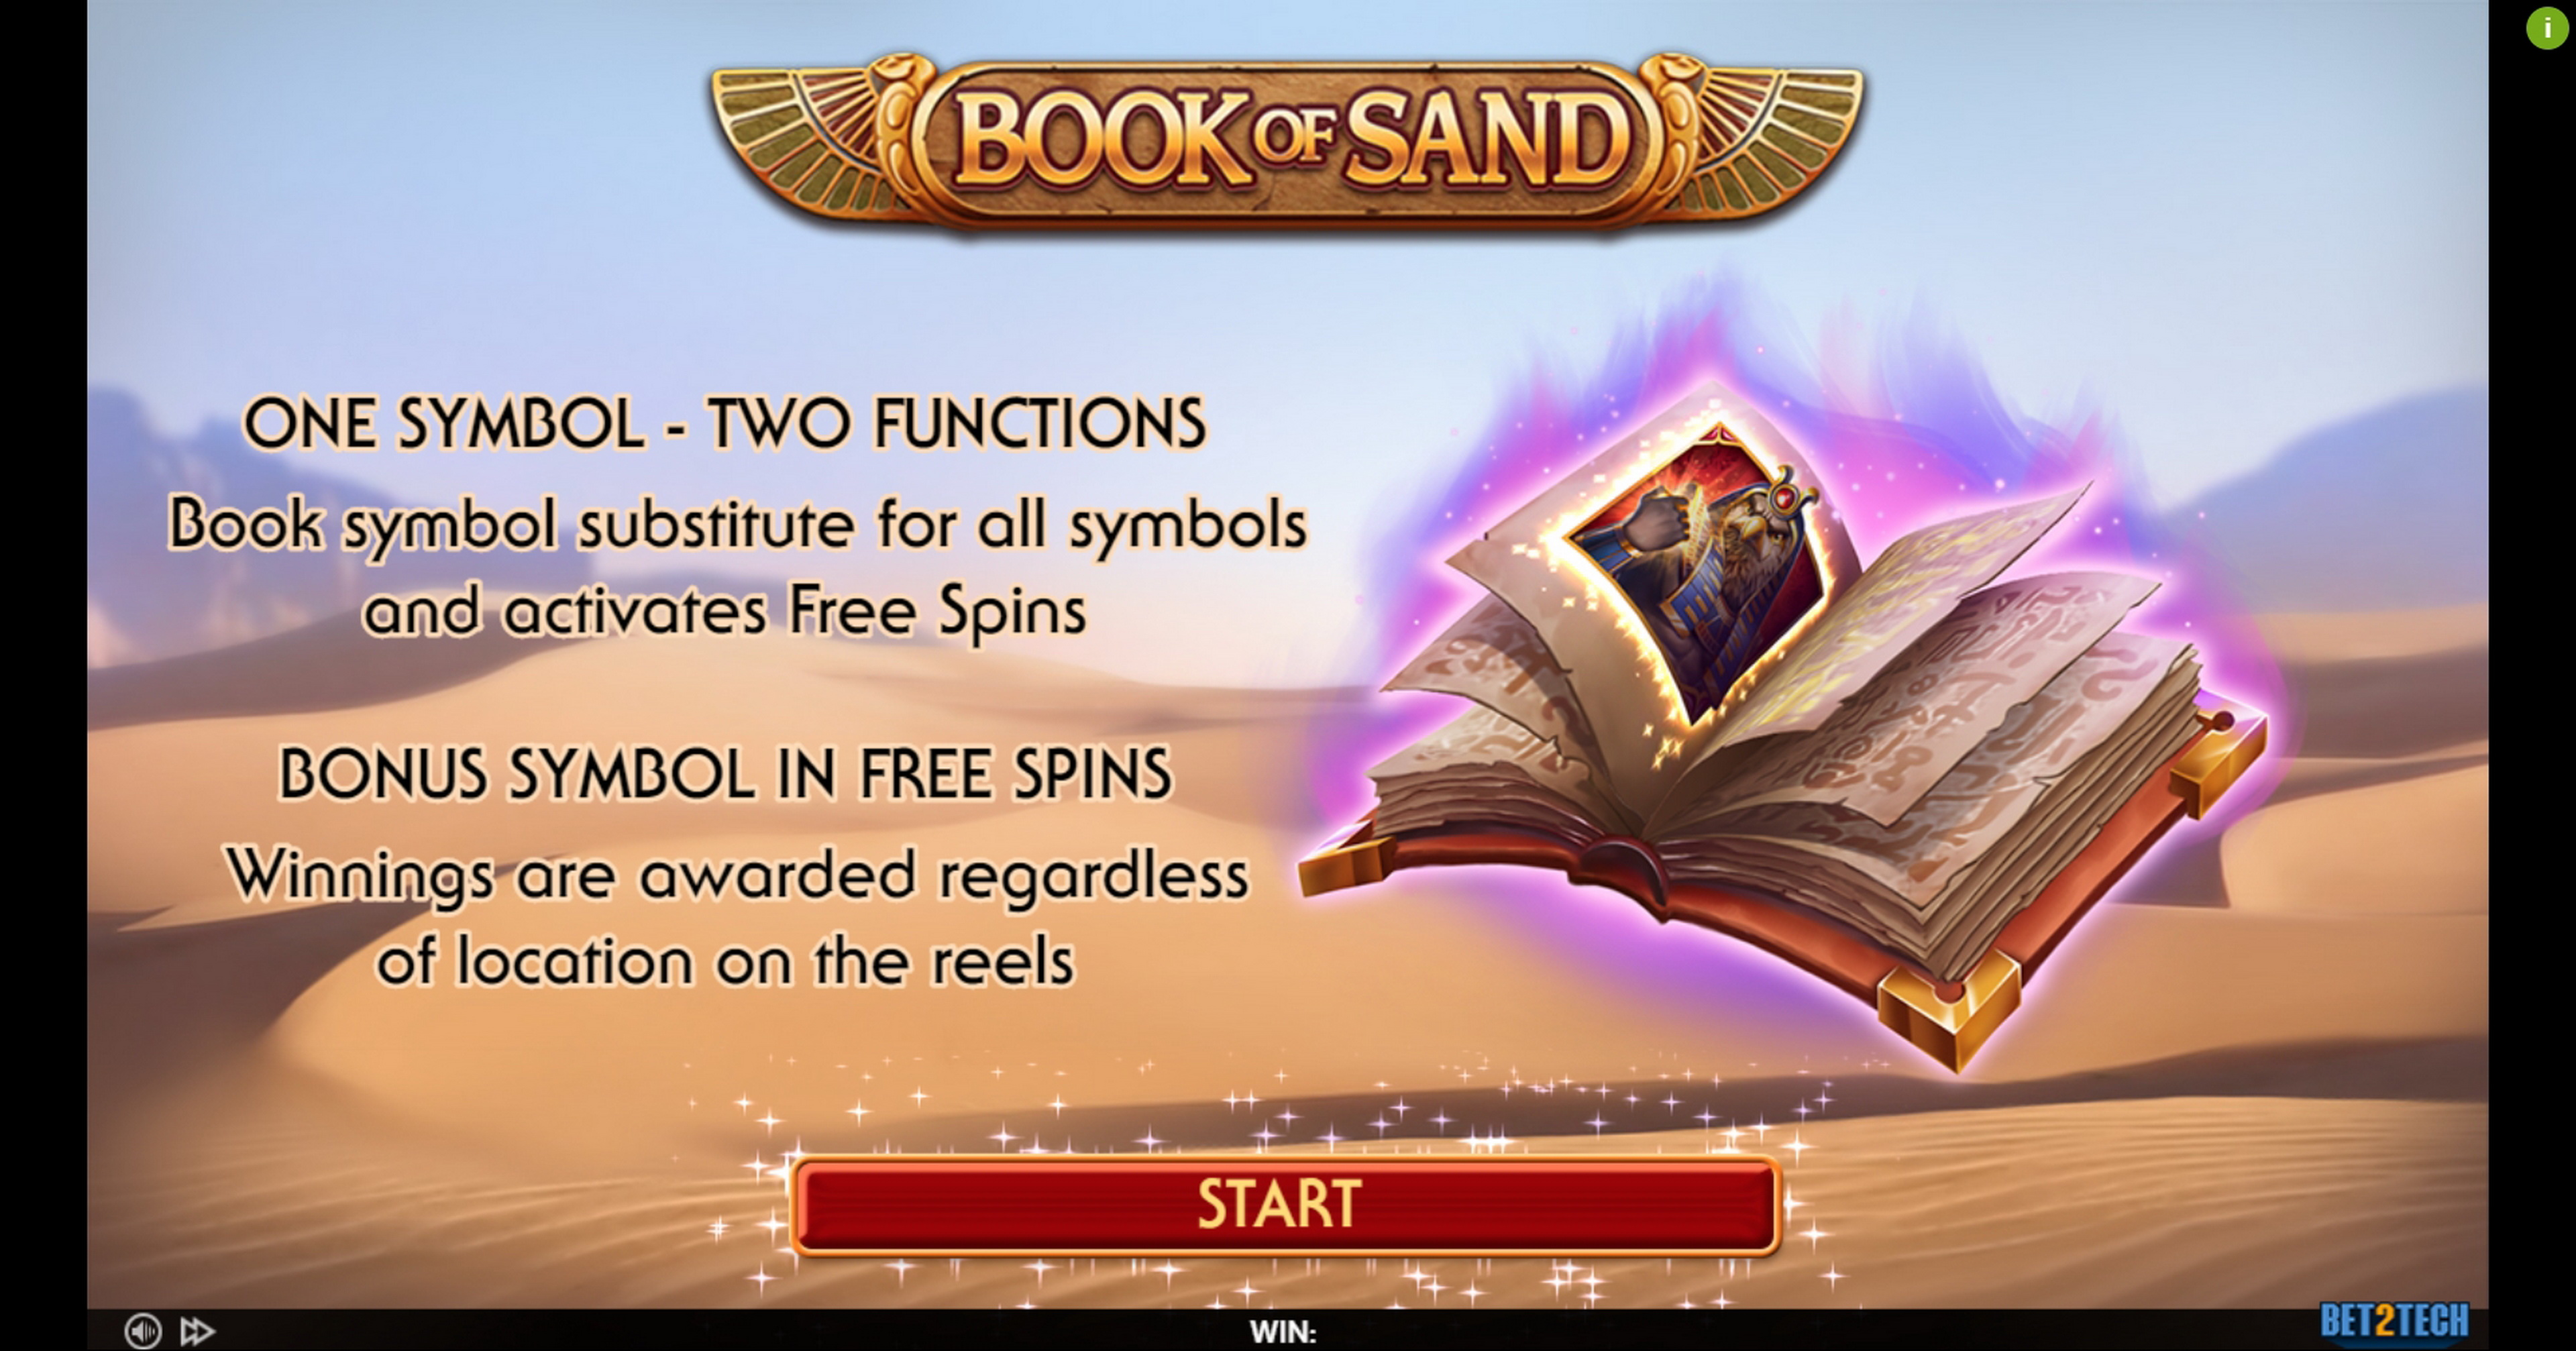 Play Book of Sand Free Casino Slot Game by Bet2Tech